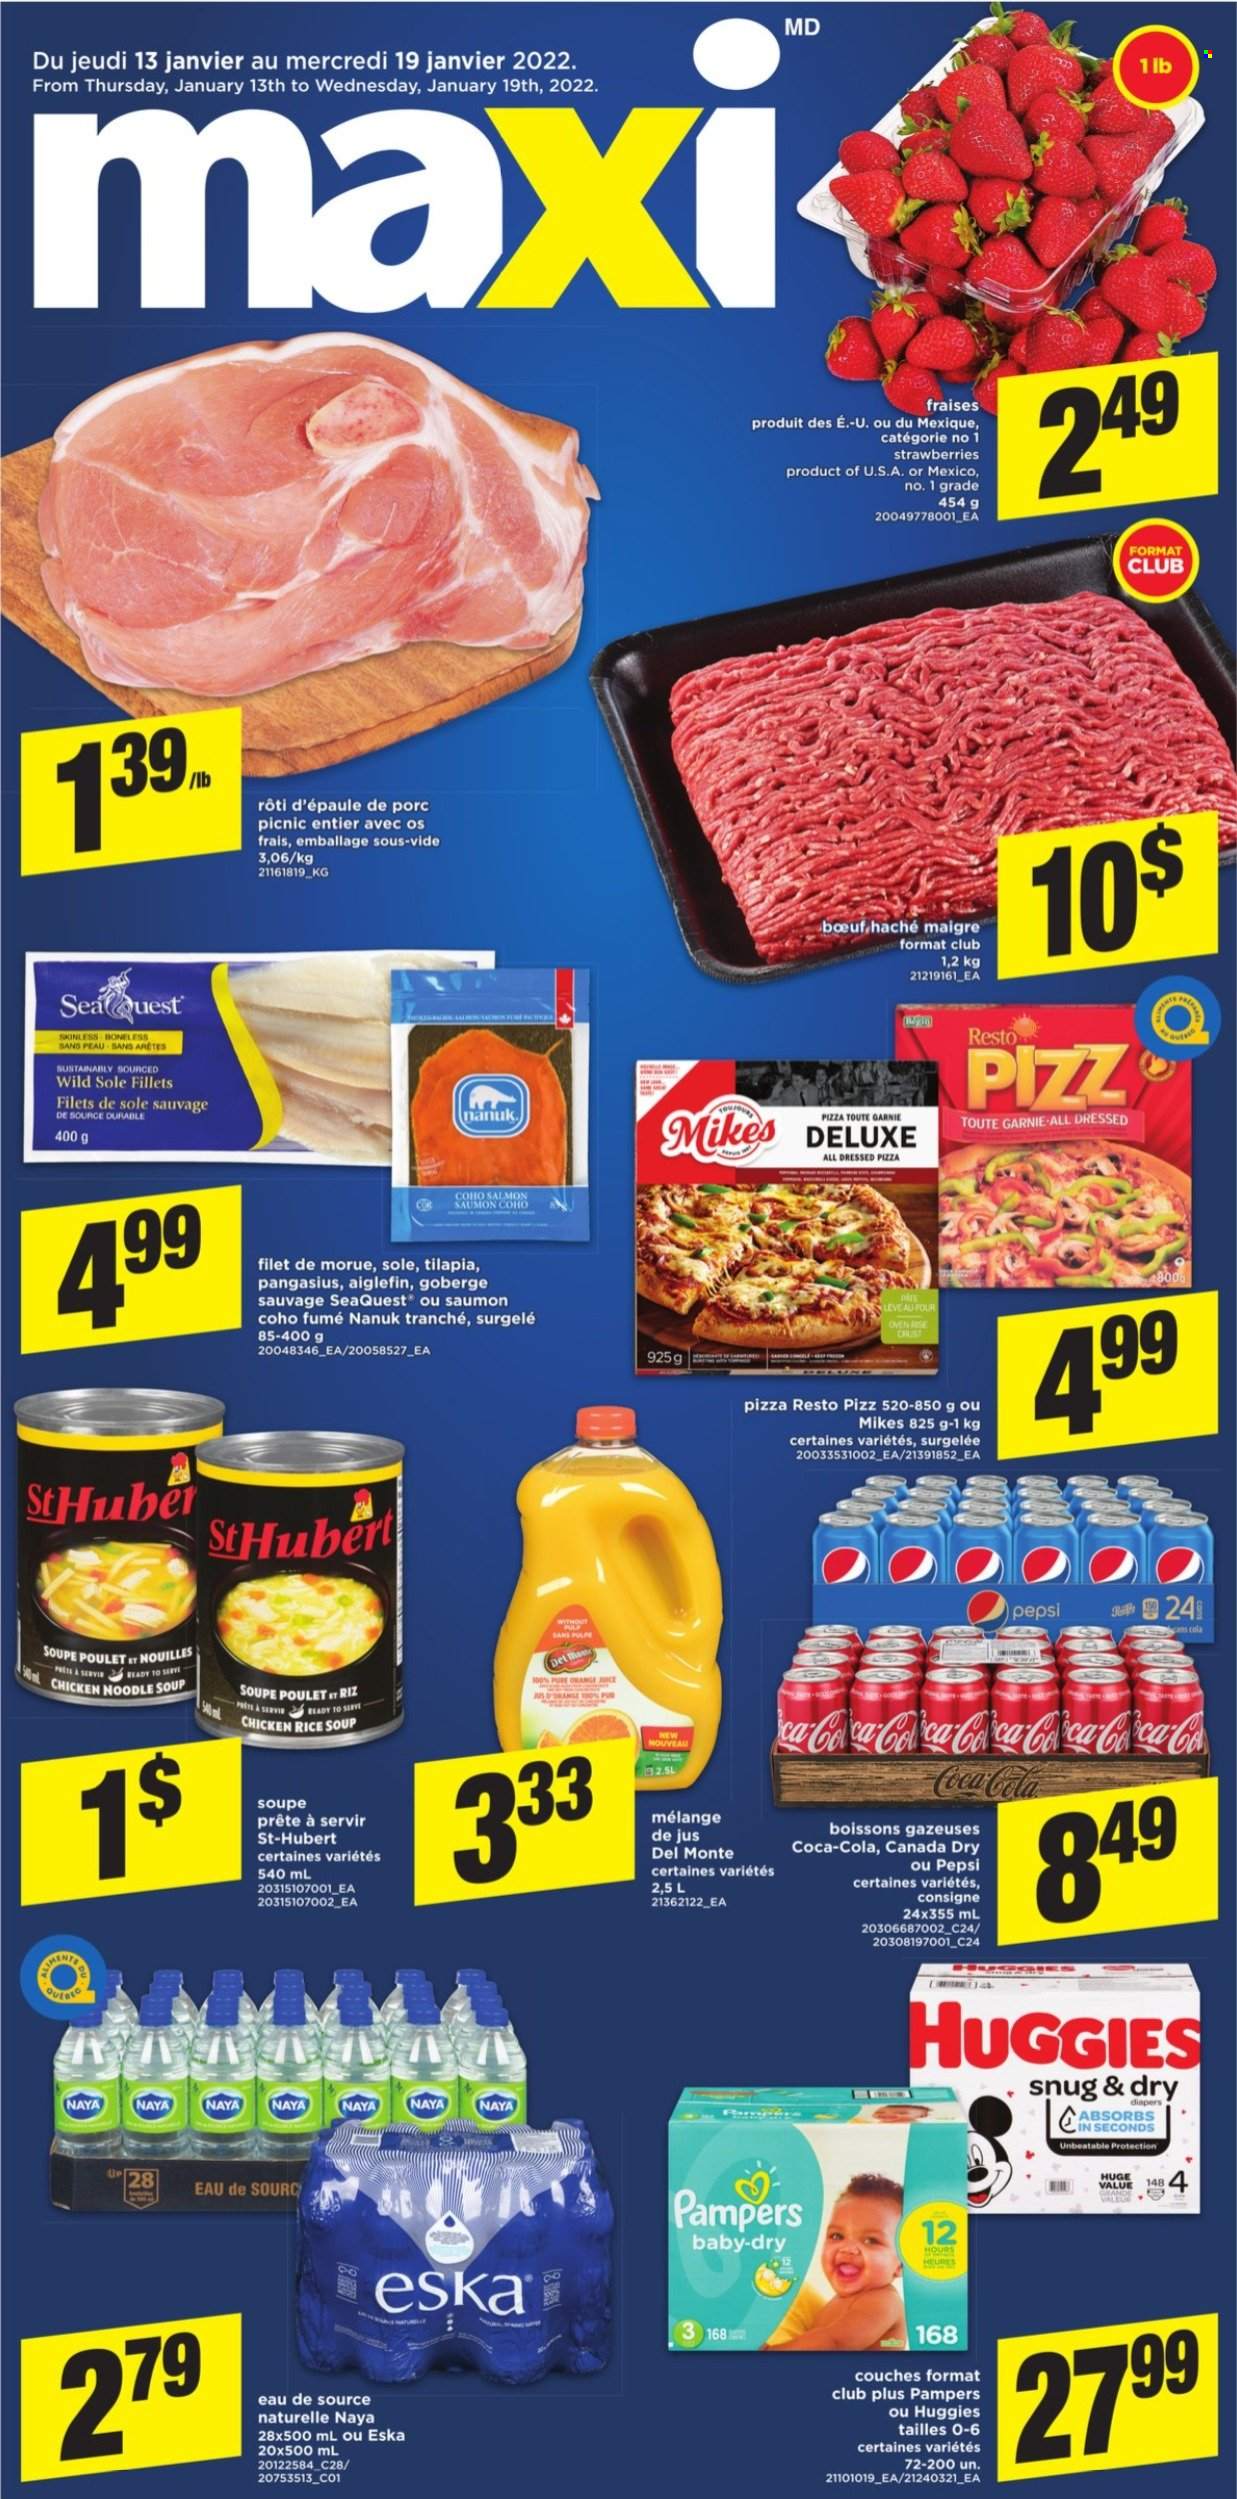 thumbnail - Maxi Flyer - January 13, 2022 - January 19, 2022 - Sales products - strawberries, salmon, tilapia, pangasius, pizza, soup, noodles cup, noodles, Canada Dry, Coca-Cola, Pepsi, Huggies, Pampers, oranges. Page 1.